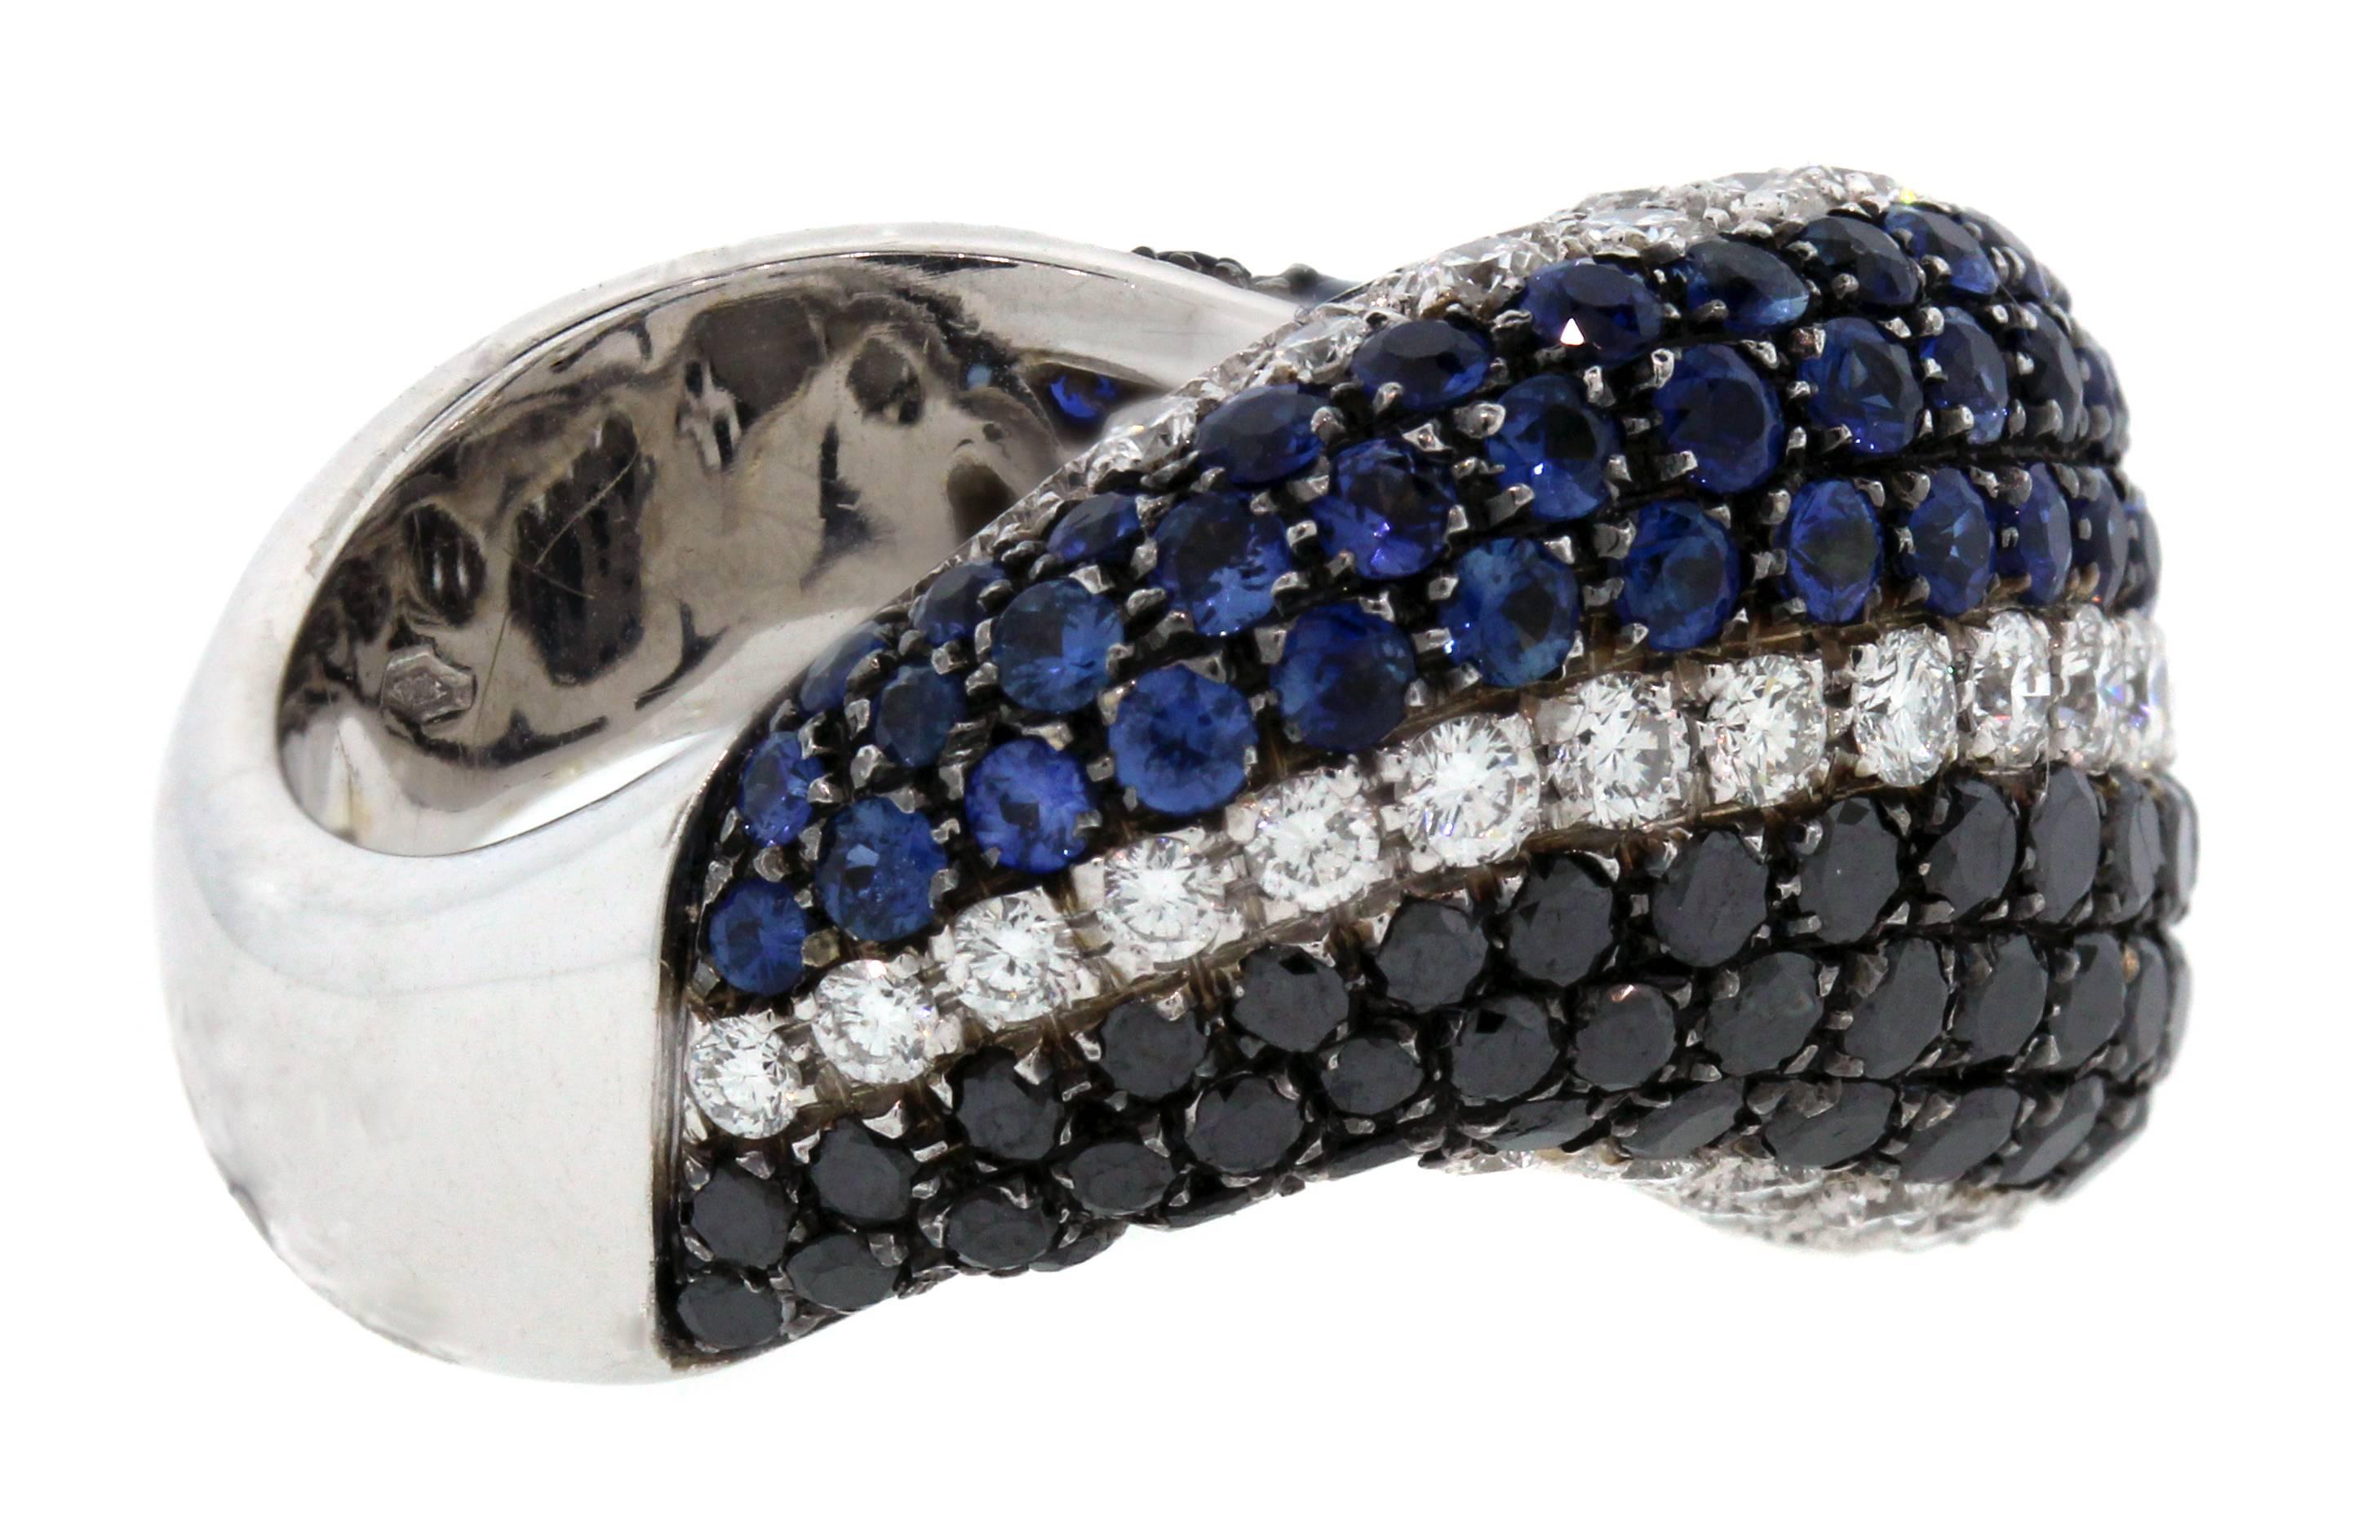 18K Gold Blue Sapphires Black and White Diamonds Curved Angled Band Ring

Gorgeous color combinations put together on this angled band ring.

1.75ct. Black Diamonds are followed by a layer of white diamonds and blue sapphires.

White Diamonds are